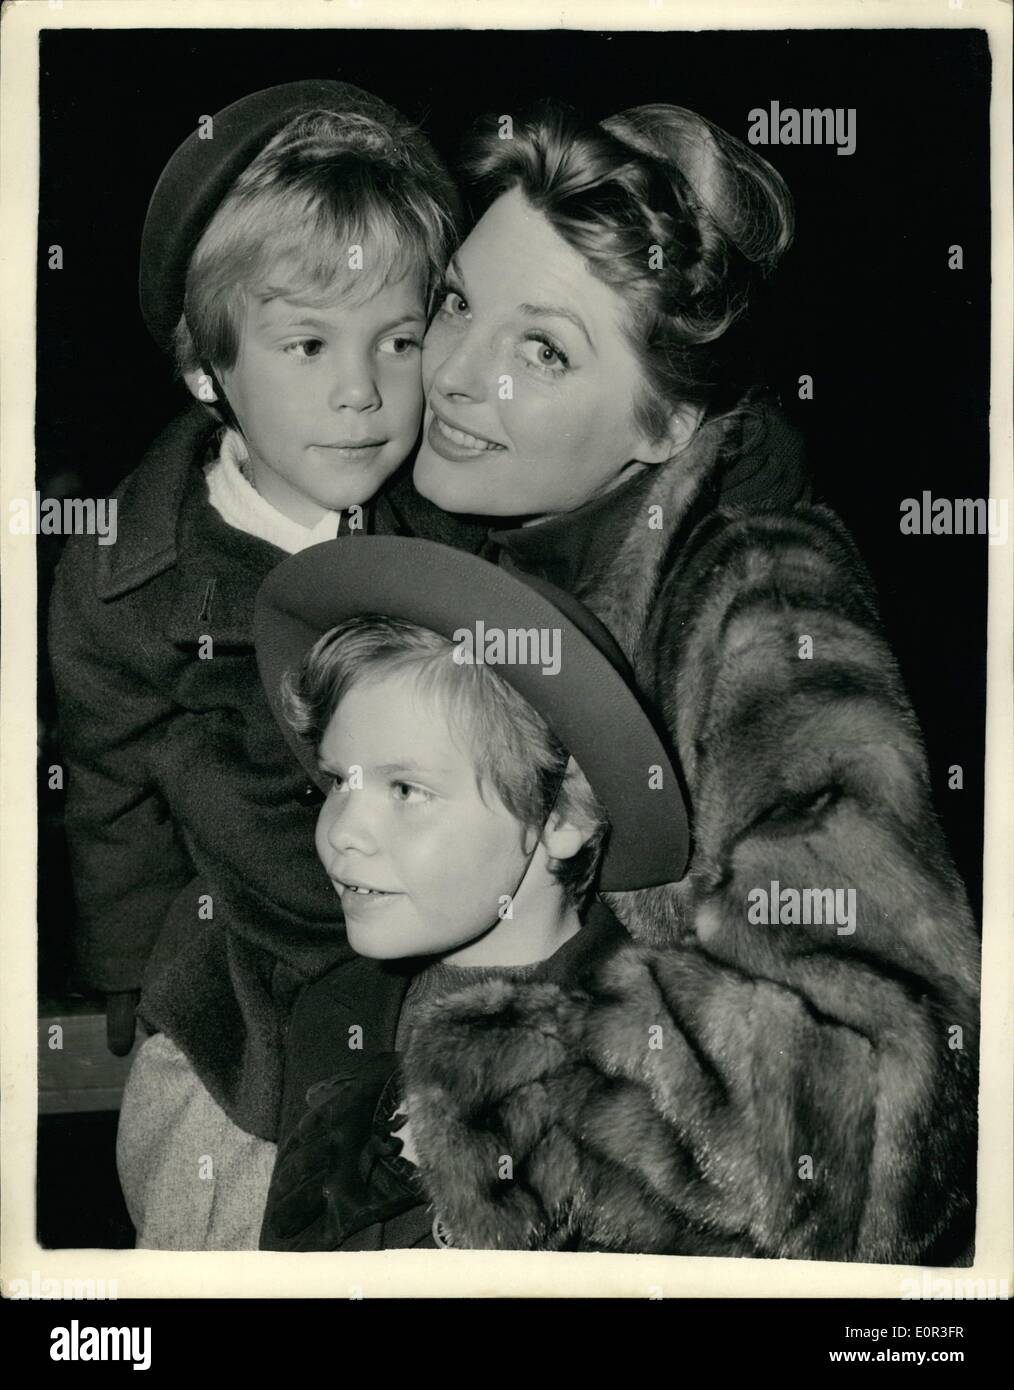 Nov. 11, 1957 - American Singing Star Arrives In London julie london At paddington: Julie London popular American singing star and her two children Lisa (5) and Stacy(8) arrived in London this morning- from the United States. She is to make her first British film here ''The Question of Adultery''. Photo shows. Julie London and children lisa (left) and Stacy on arrival at Paddington today. Stock Photo